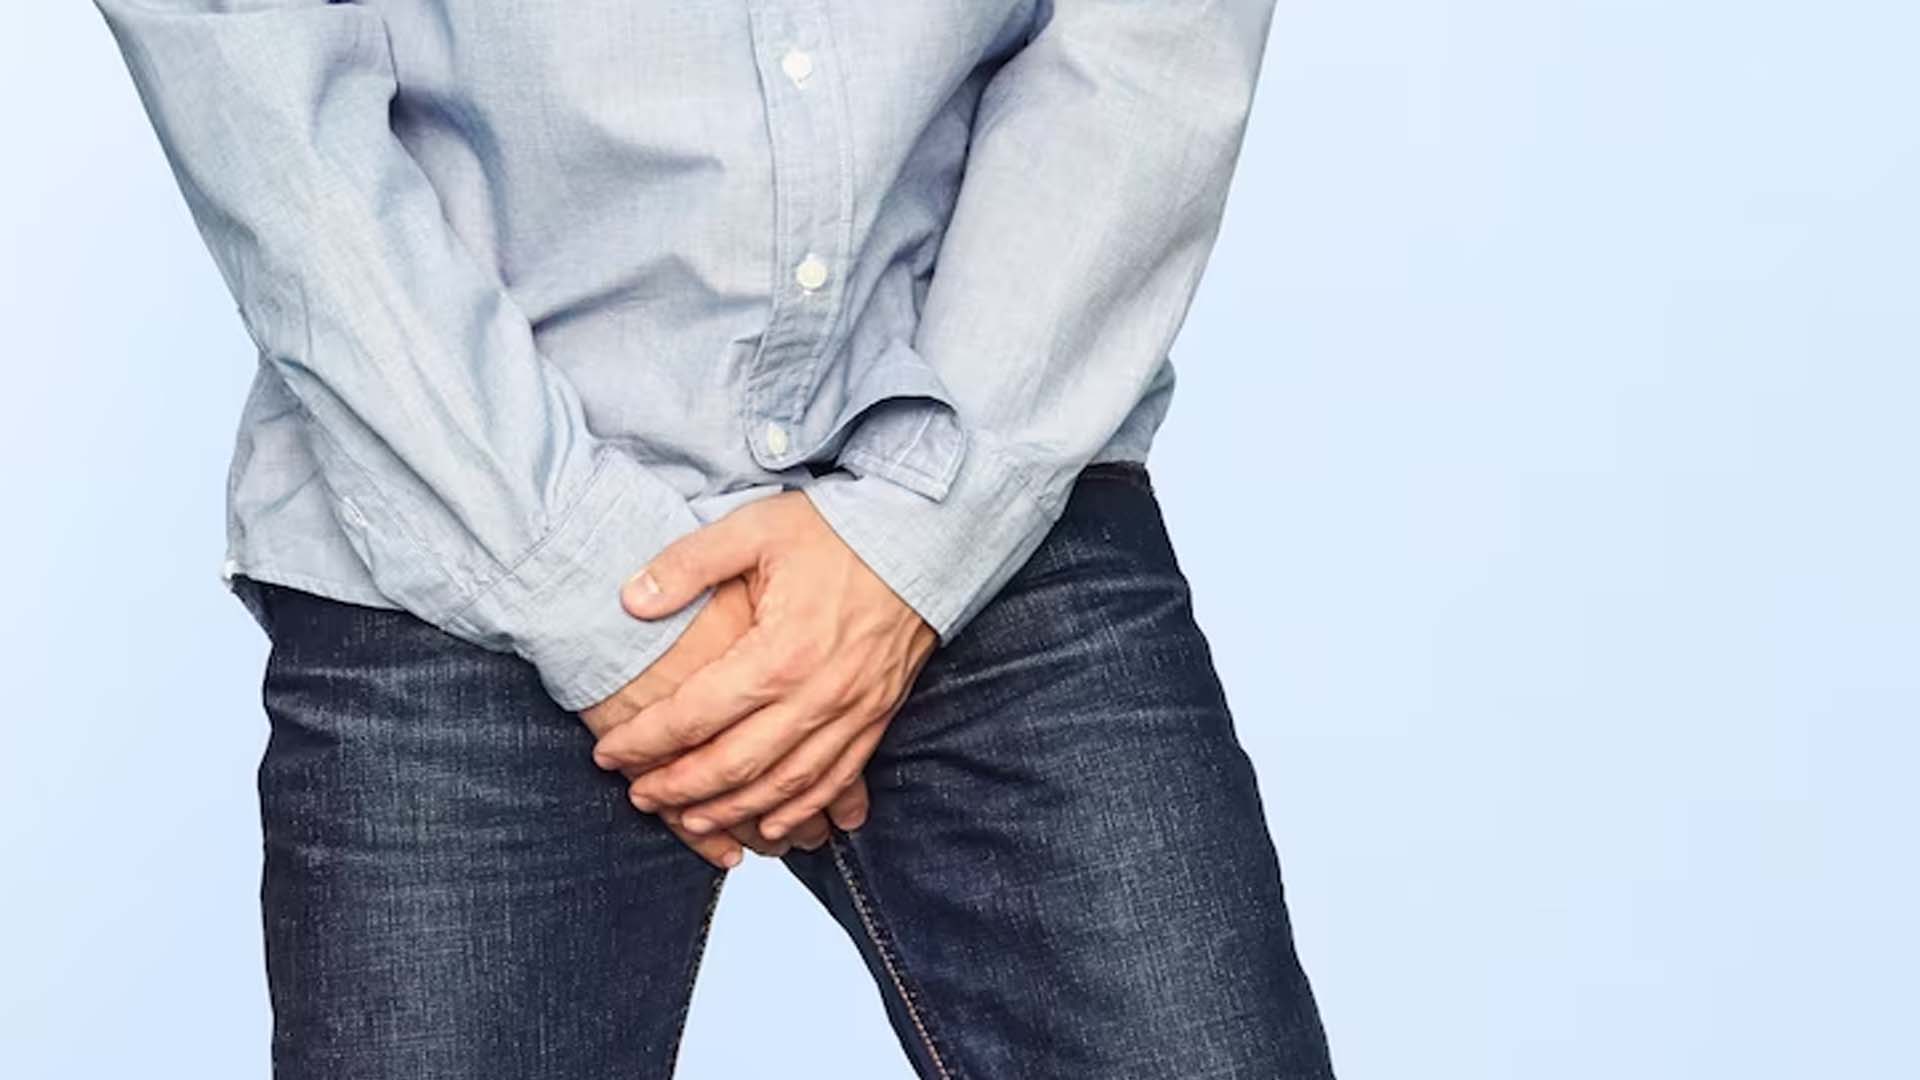 What are the Home Remedies for Testicular Pain?